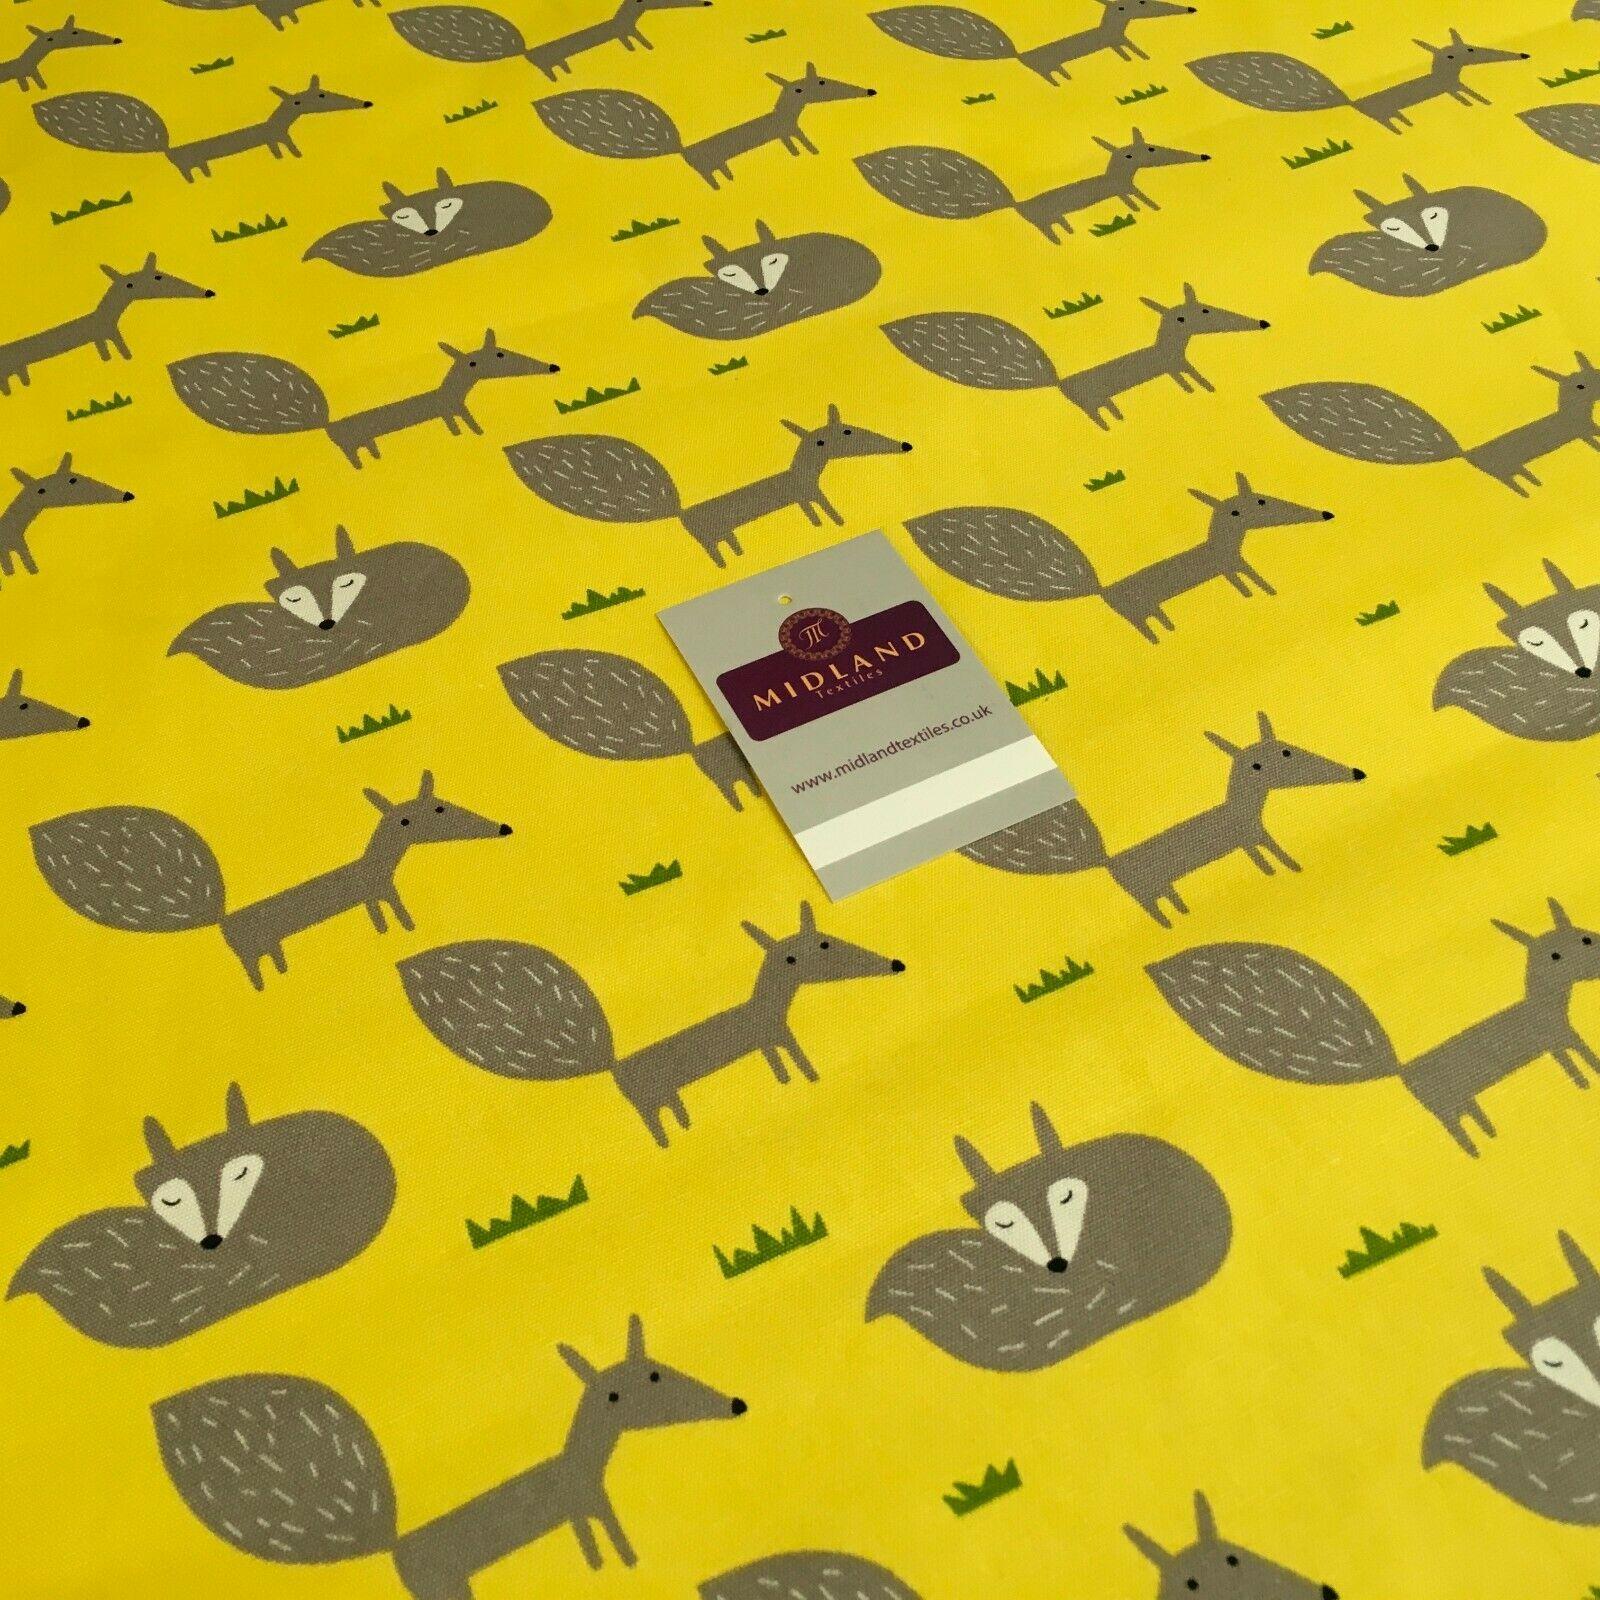 Yellow Foxes Printed 100% Cotton Canvas Craft Fabric 150 Cm Wide Mtex MK856-19